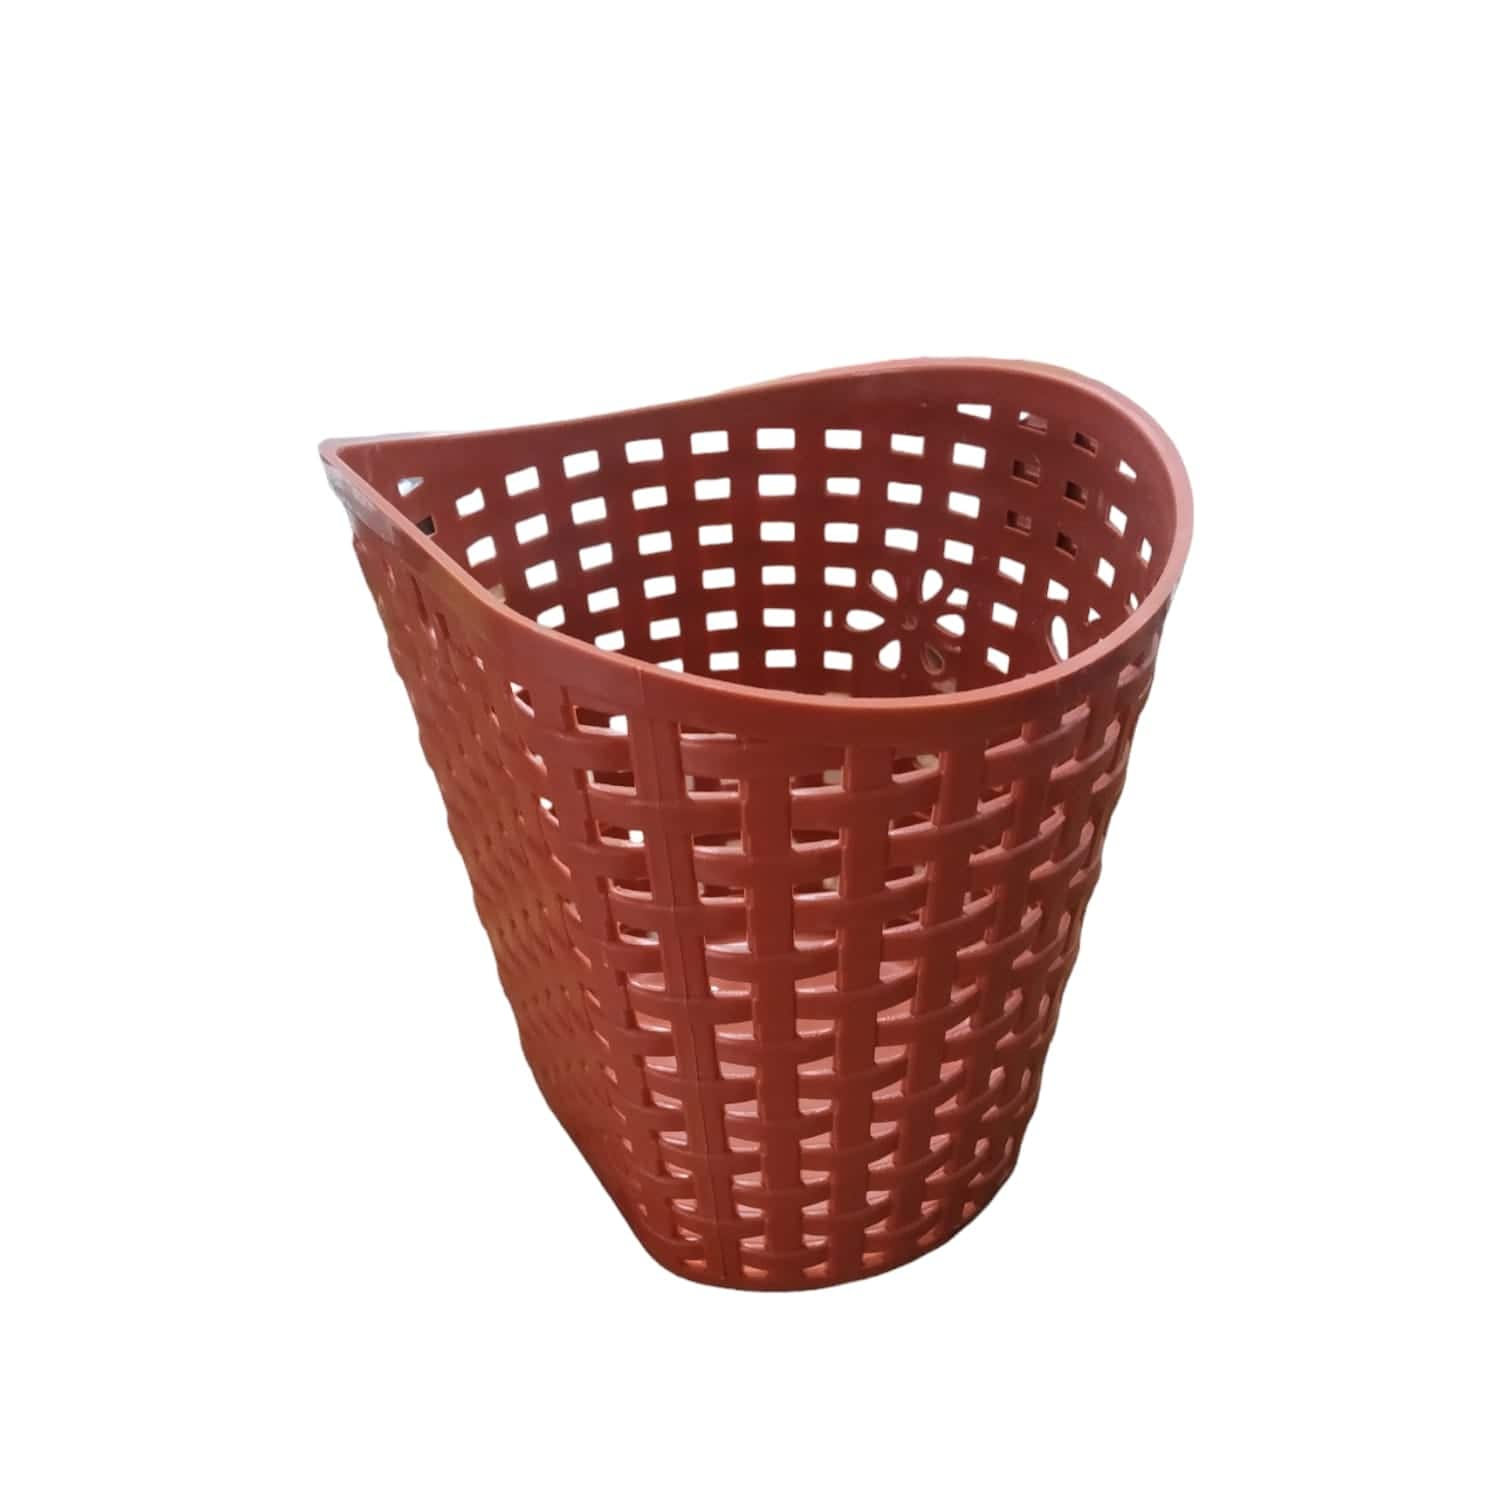 Parshwa Traders Wooden & Plastic Box Storage Basket with Drain Holes - Size 11x11x10 cm, Plastic Assorted colour